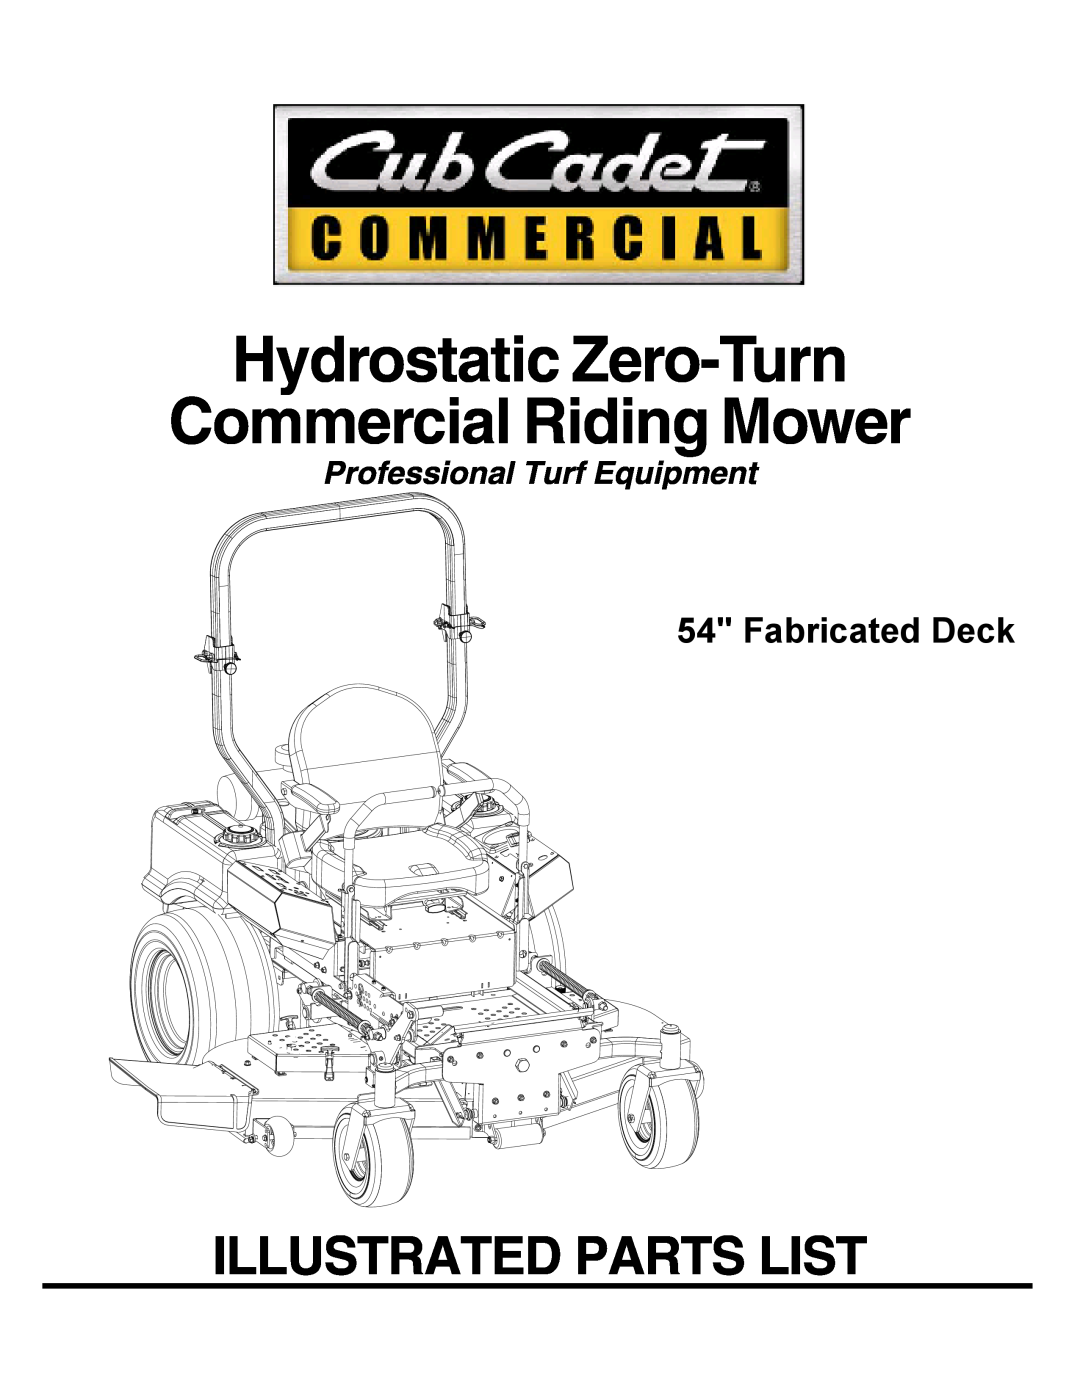 Cub Cadet 53AI8CTW750 manual Hydrostatic Zero-Turn Commercial Riding Mower, Illustrated Parts List, Fabricated Deck 